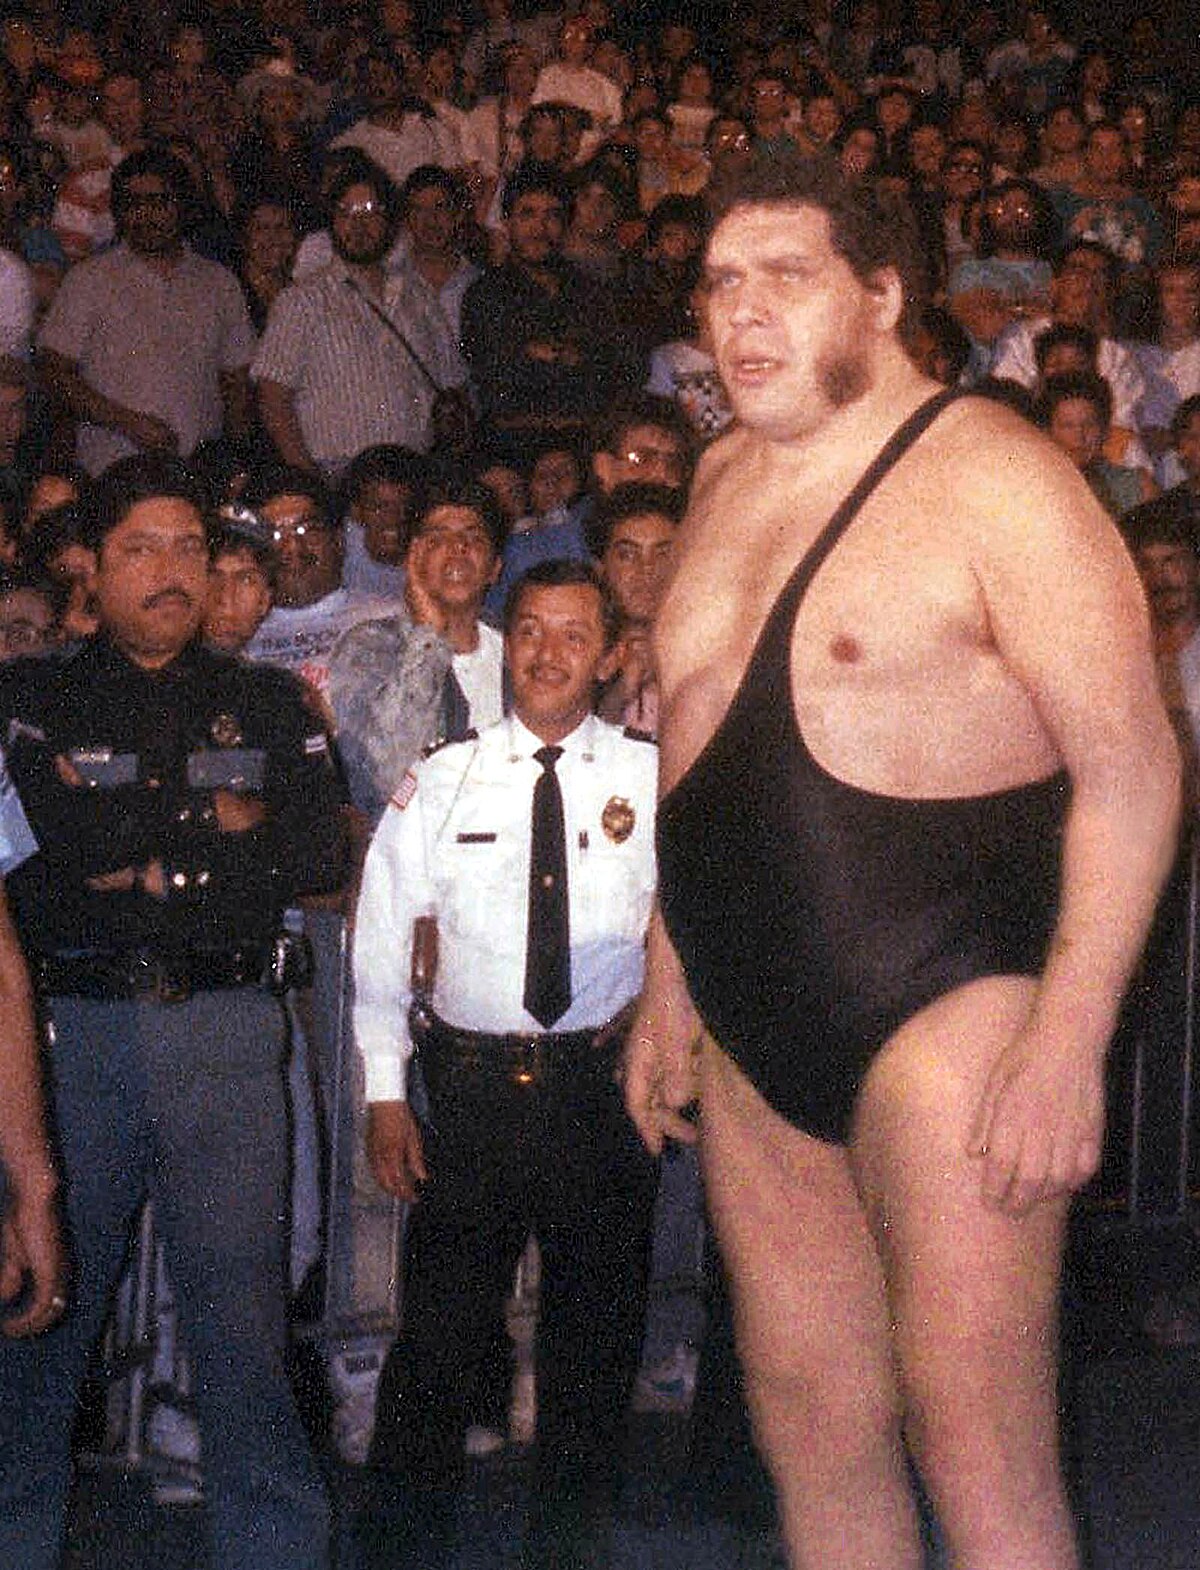 bruce provencher add photo andre the giant dick